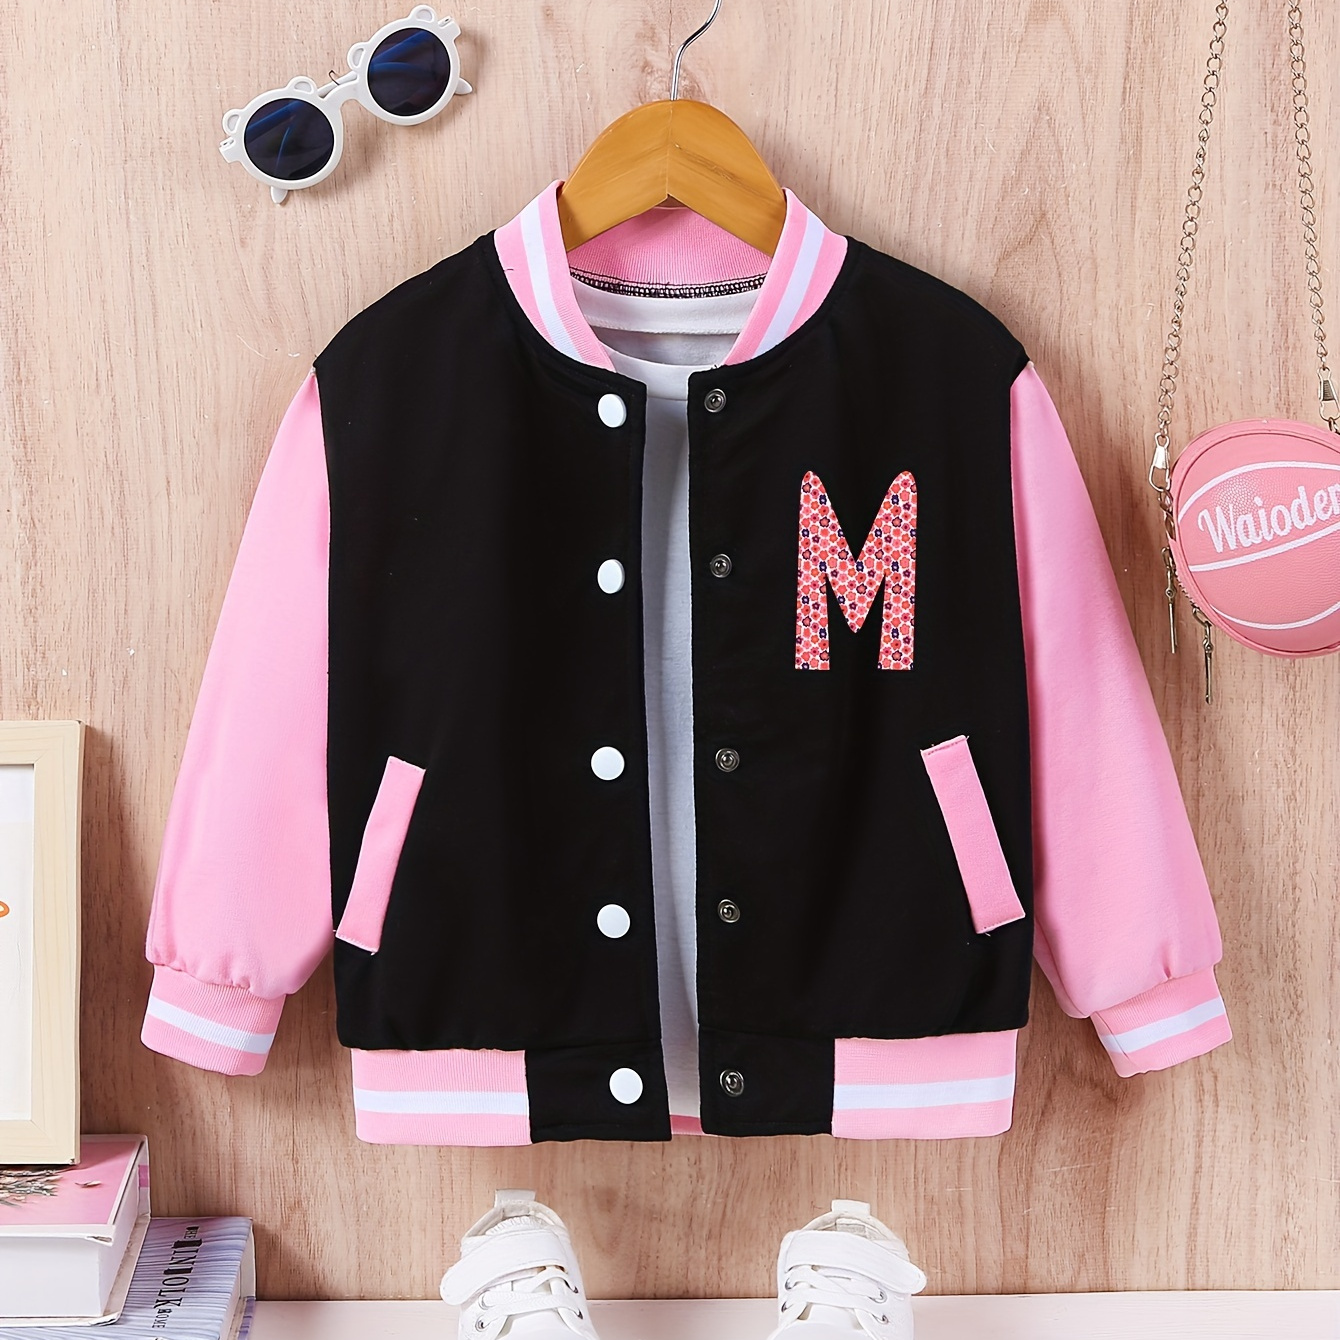 

Girl's Trendy Cute 'm' Alphabet Print Varsity Jacket, Color Block Casual Jackets For Girls Spring And Fall